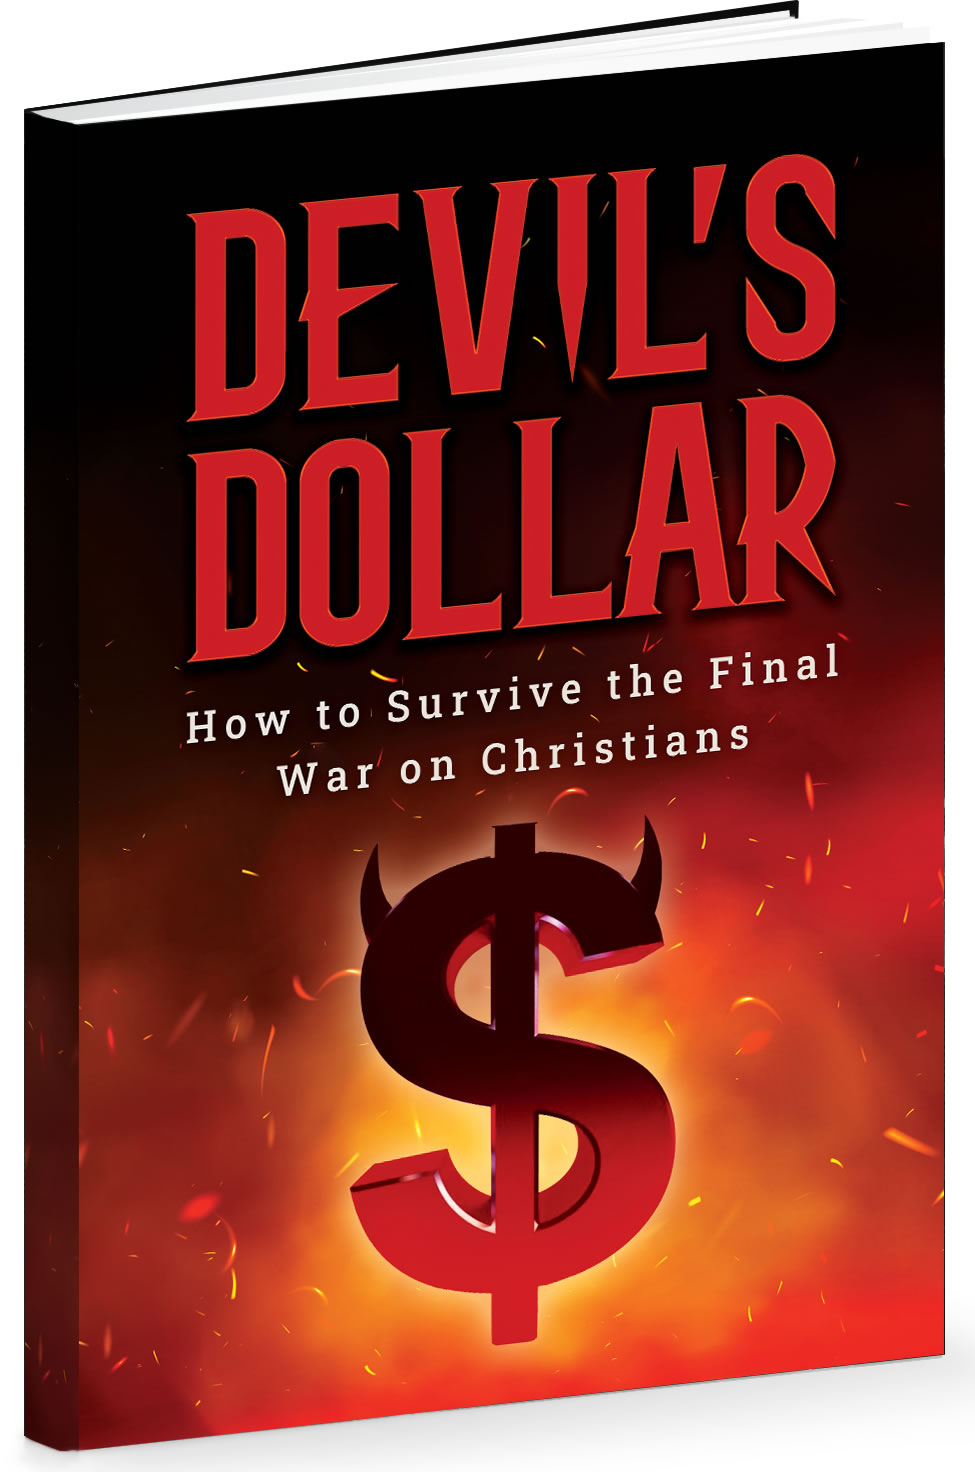 Review: Teddy Daniels' Devil's Dollar: How to Survive the Final War on Christians